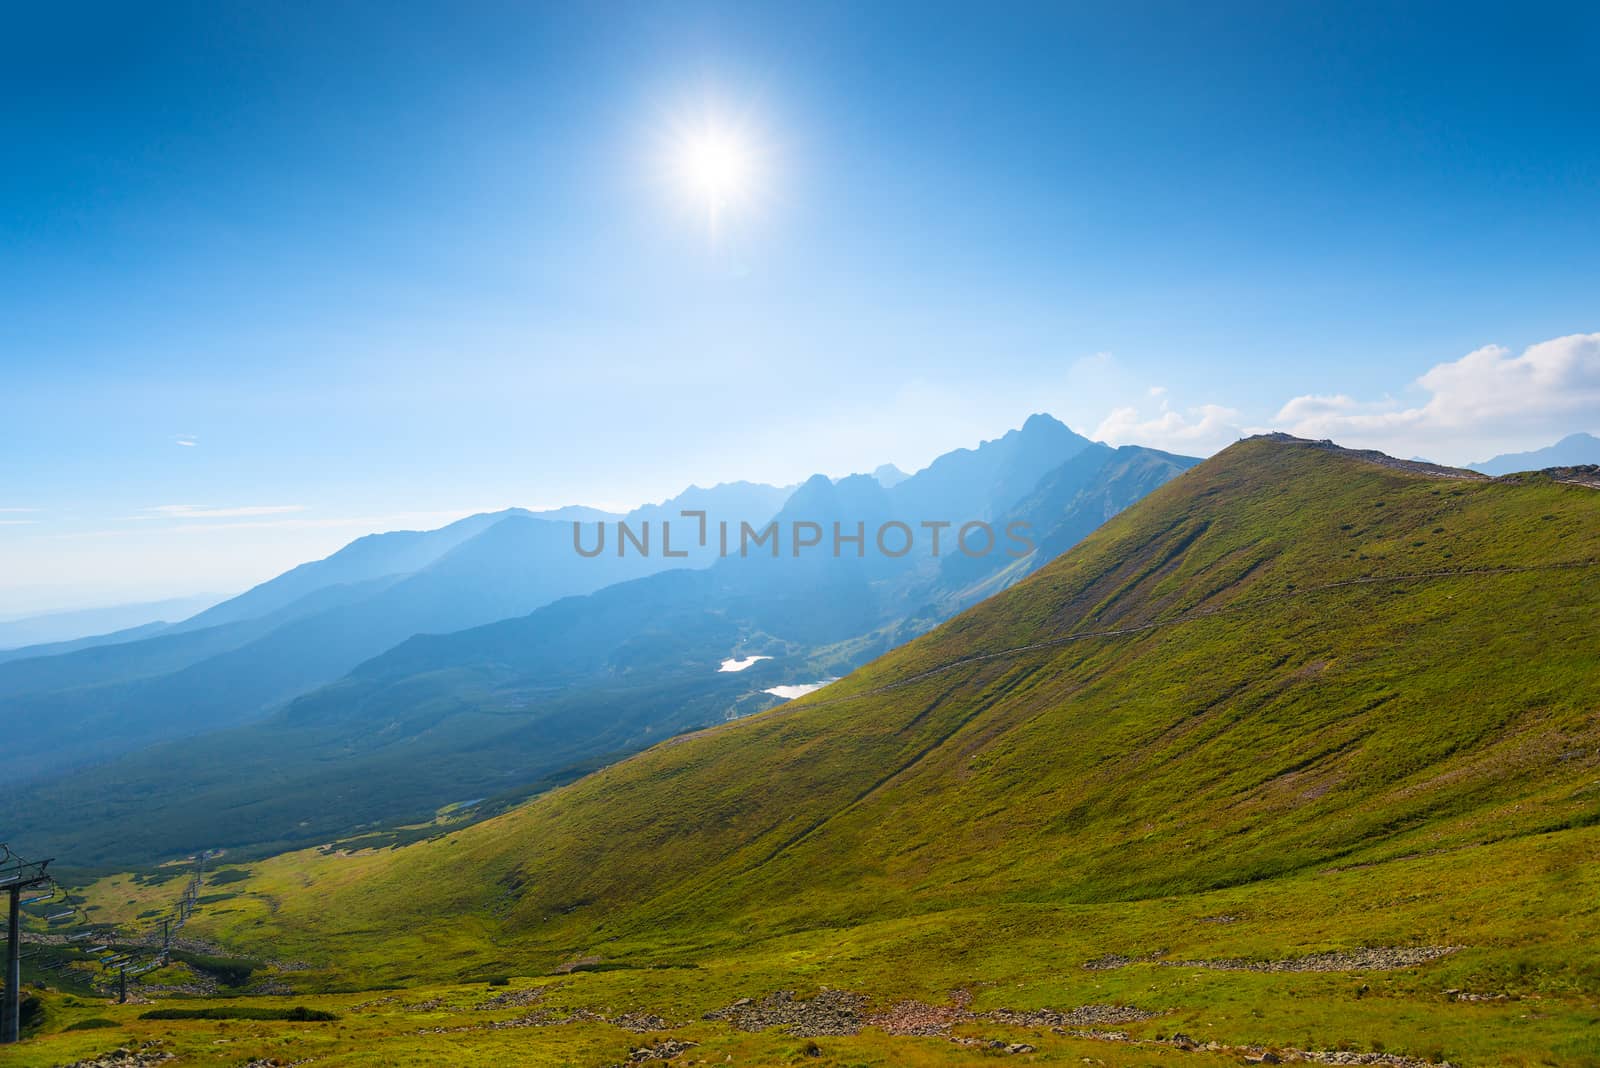 Bright sunshine over high beautiful mountains in Poland Kasprowy Wierch